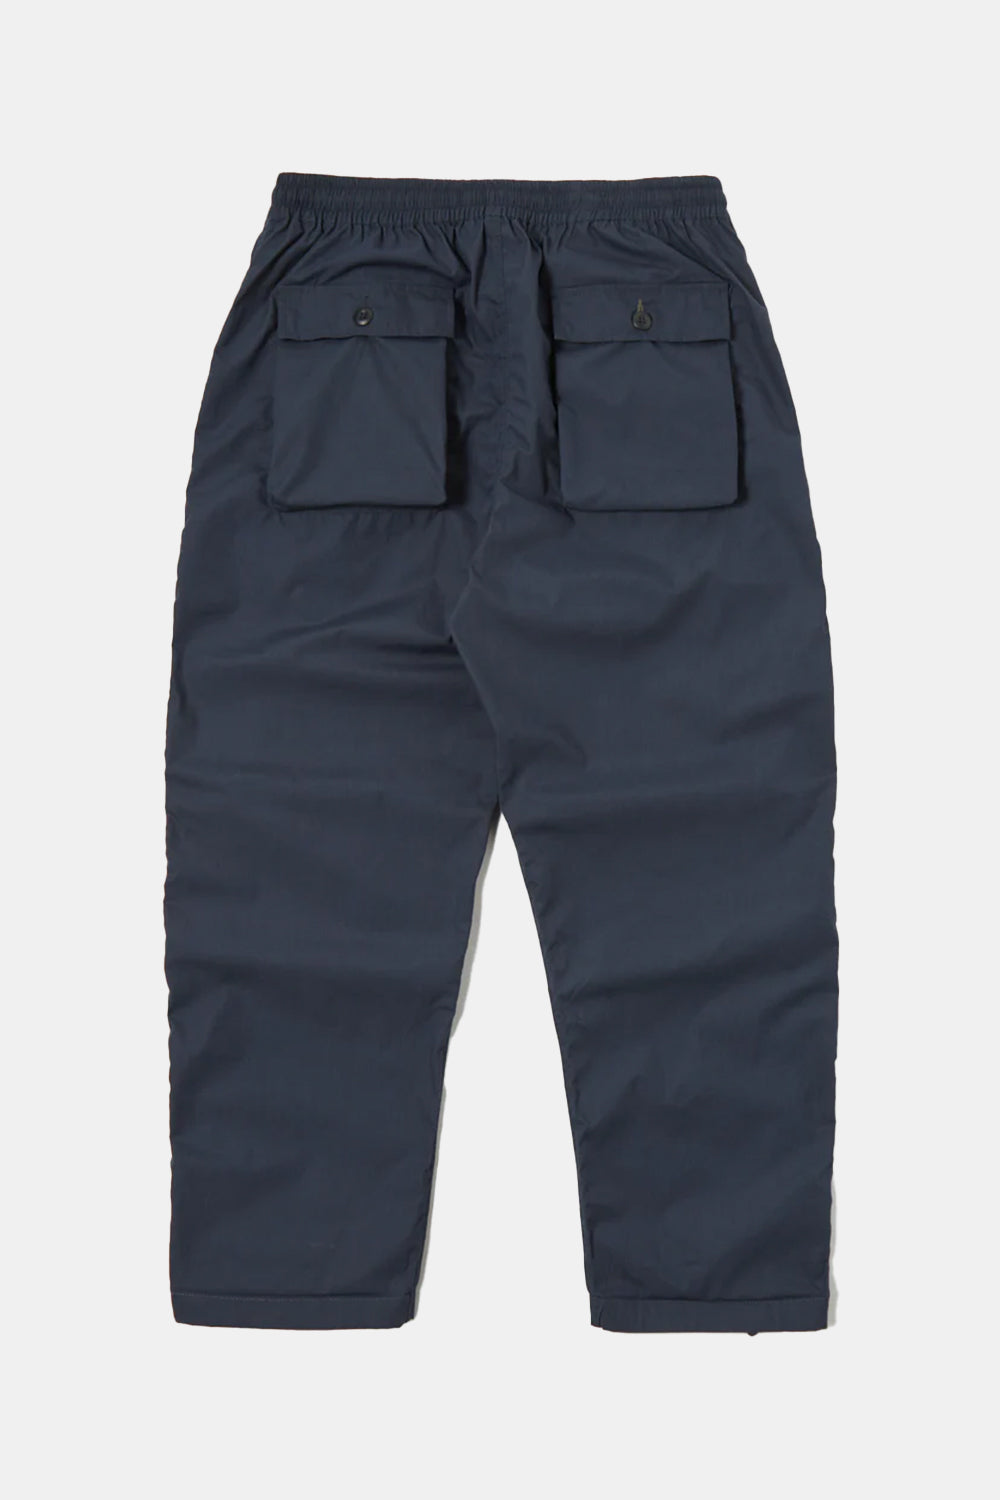 Universal Works Recycled Poly Tech Parachute Pants (Navy)
